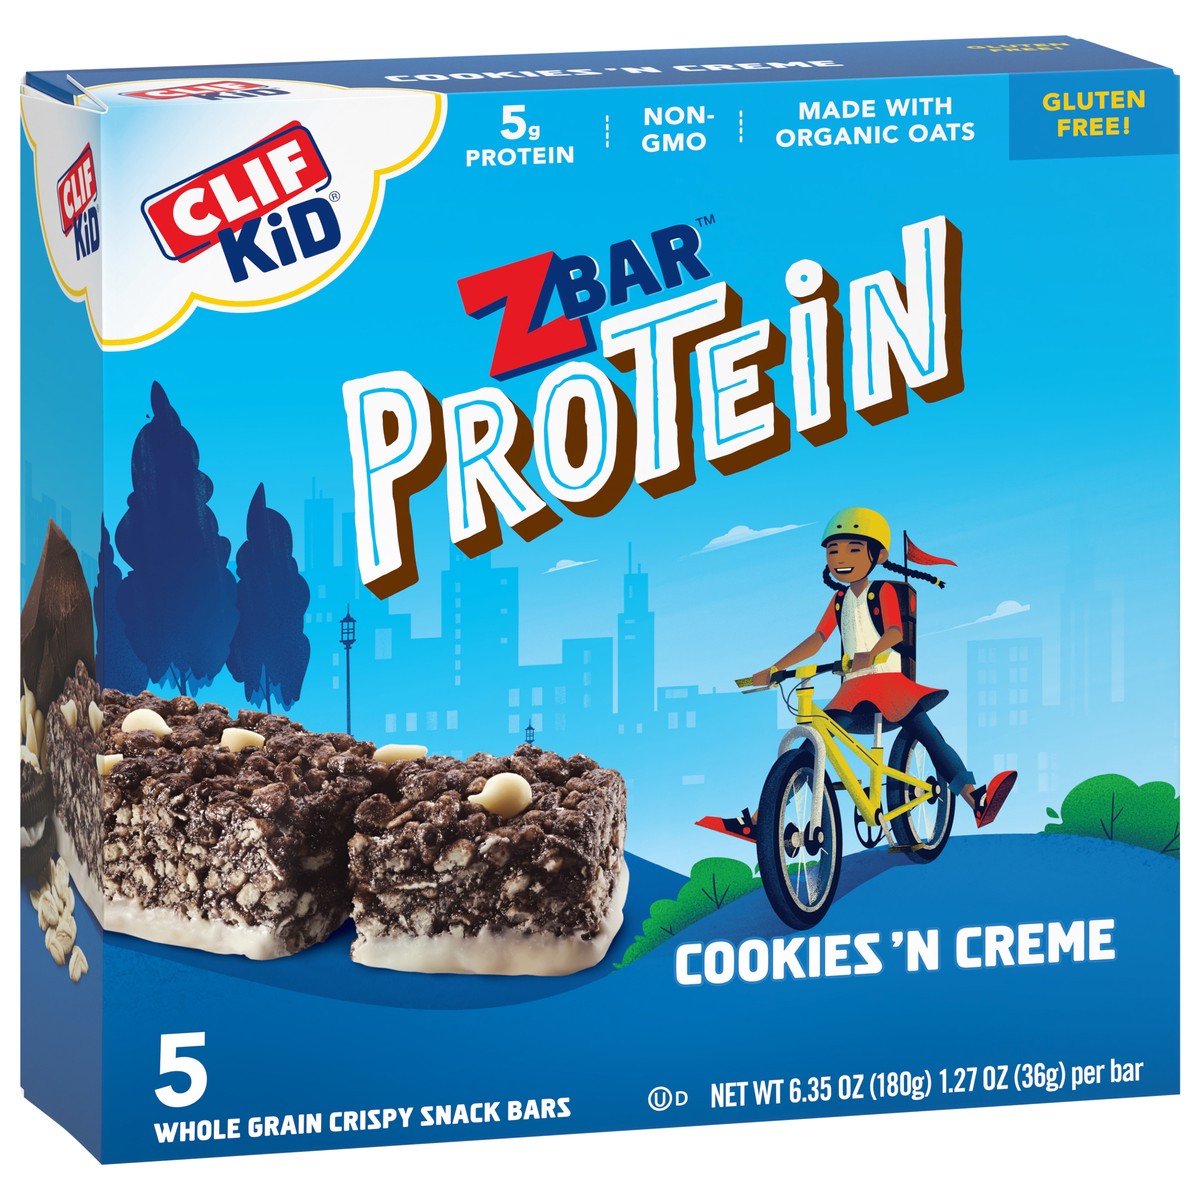 slide 2 of 9, Zbar Protein - Cookies 'n Creme - Crispy Whole Grain Snack Bars - Made with Organic Oats - Non-GMO - 5g Protein - 1.27 oz. (5 Pack), 5 ct; 6.35 oz